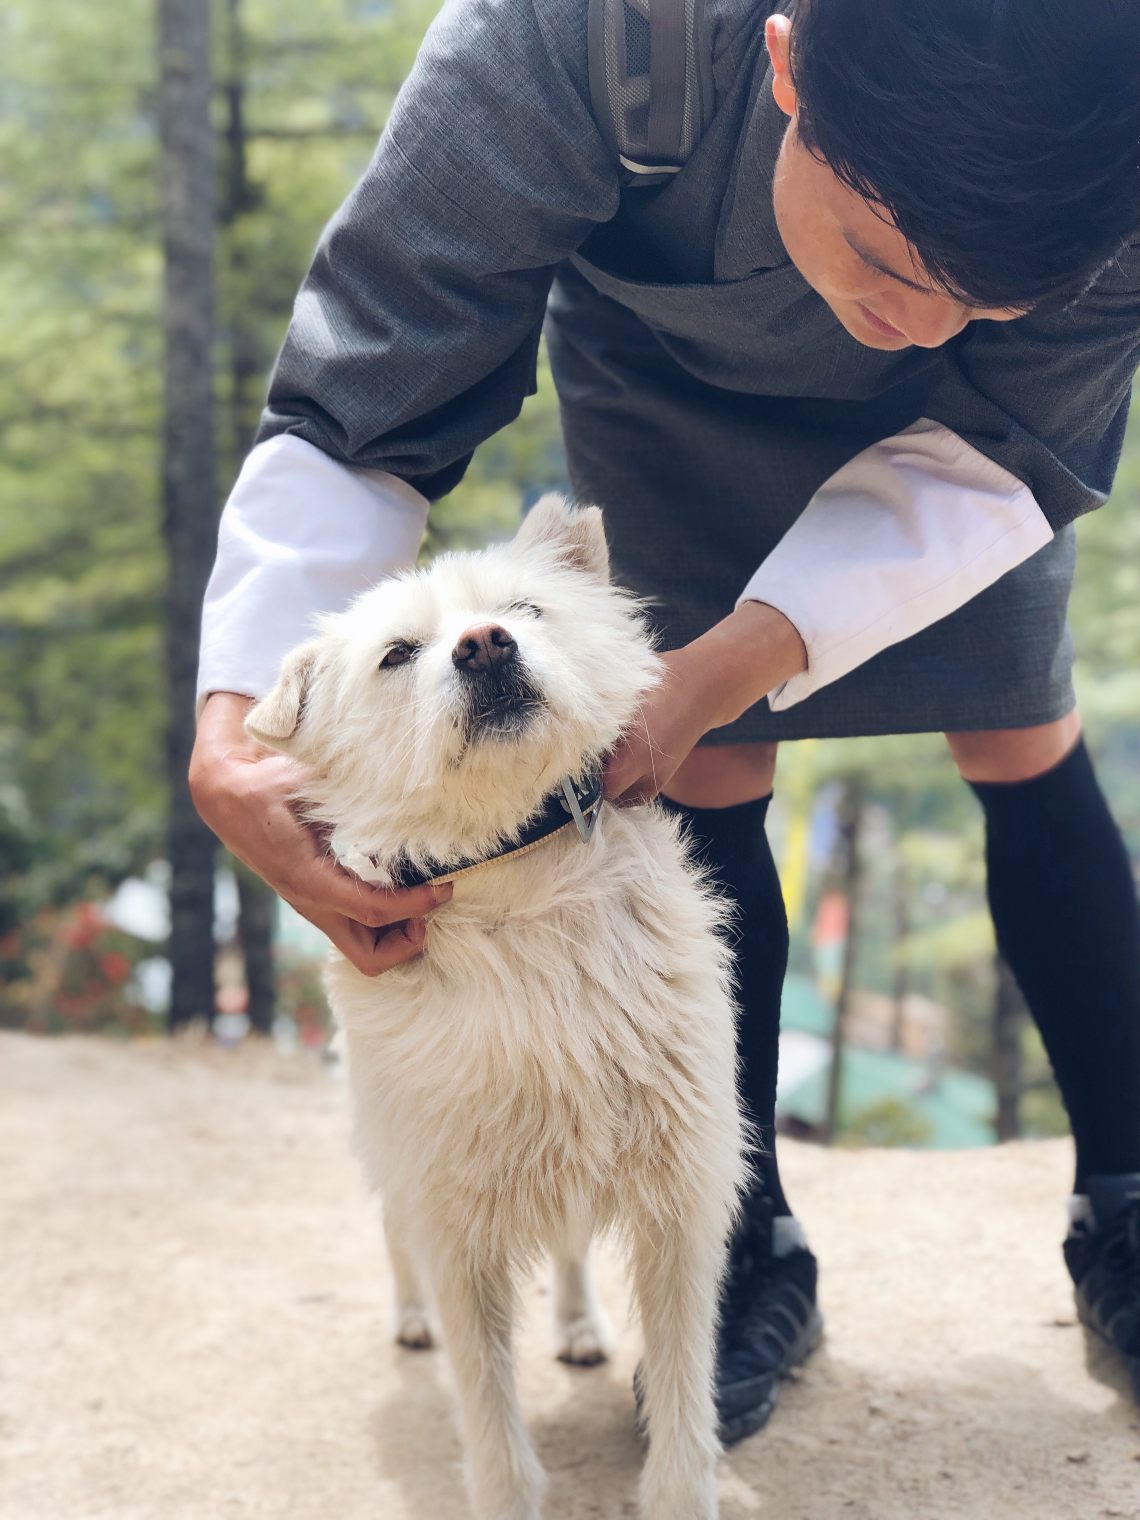 Dog with a man in traditional Bhutanese wear